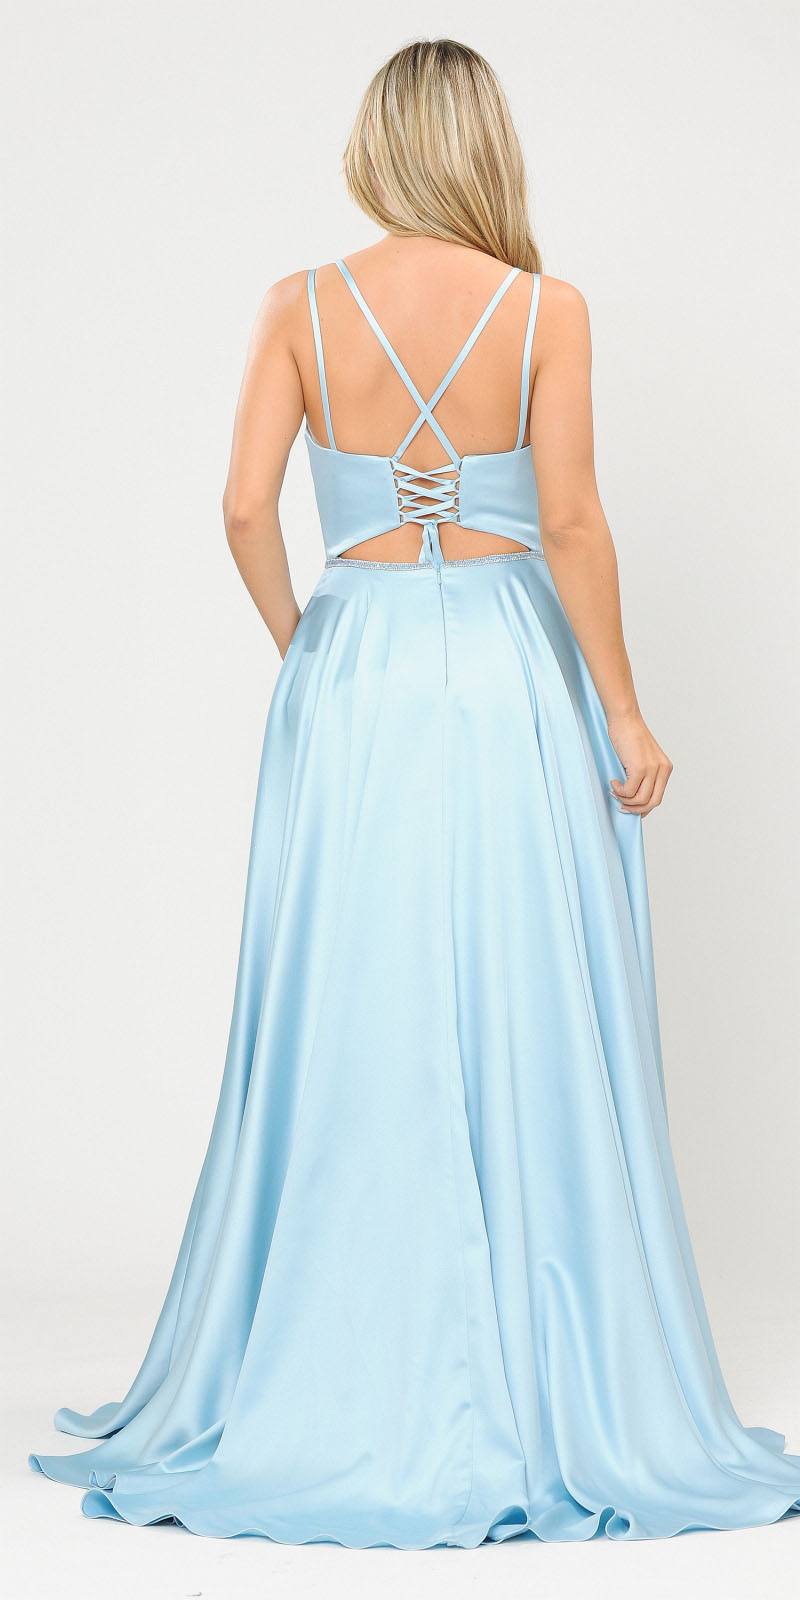 Long Romper Prom Dress with Cut-Out Lace-Up Back Blue